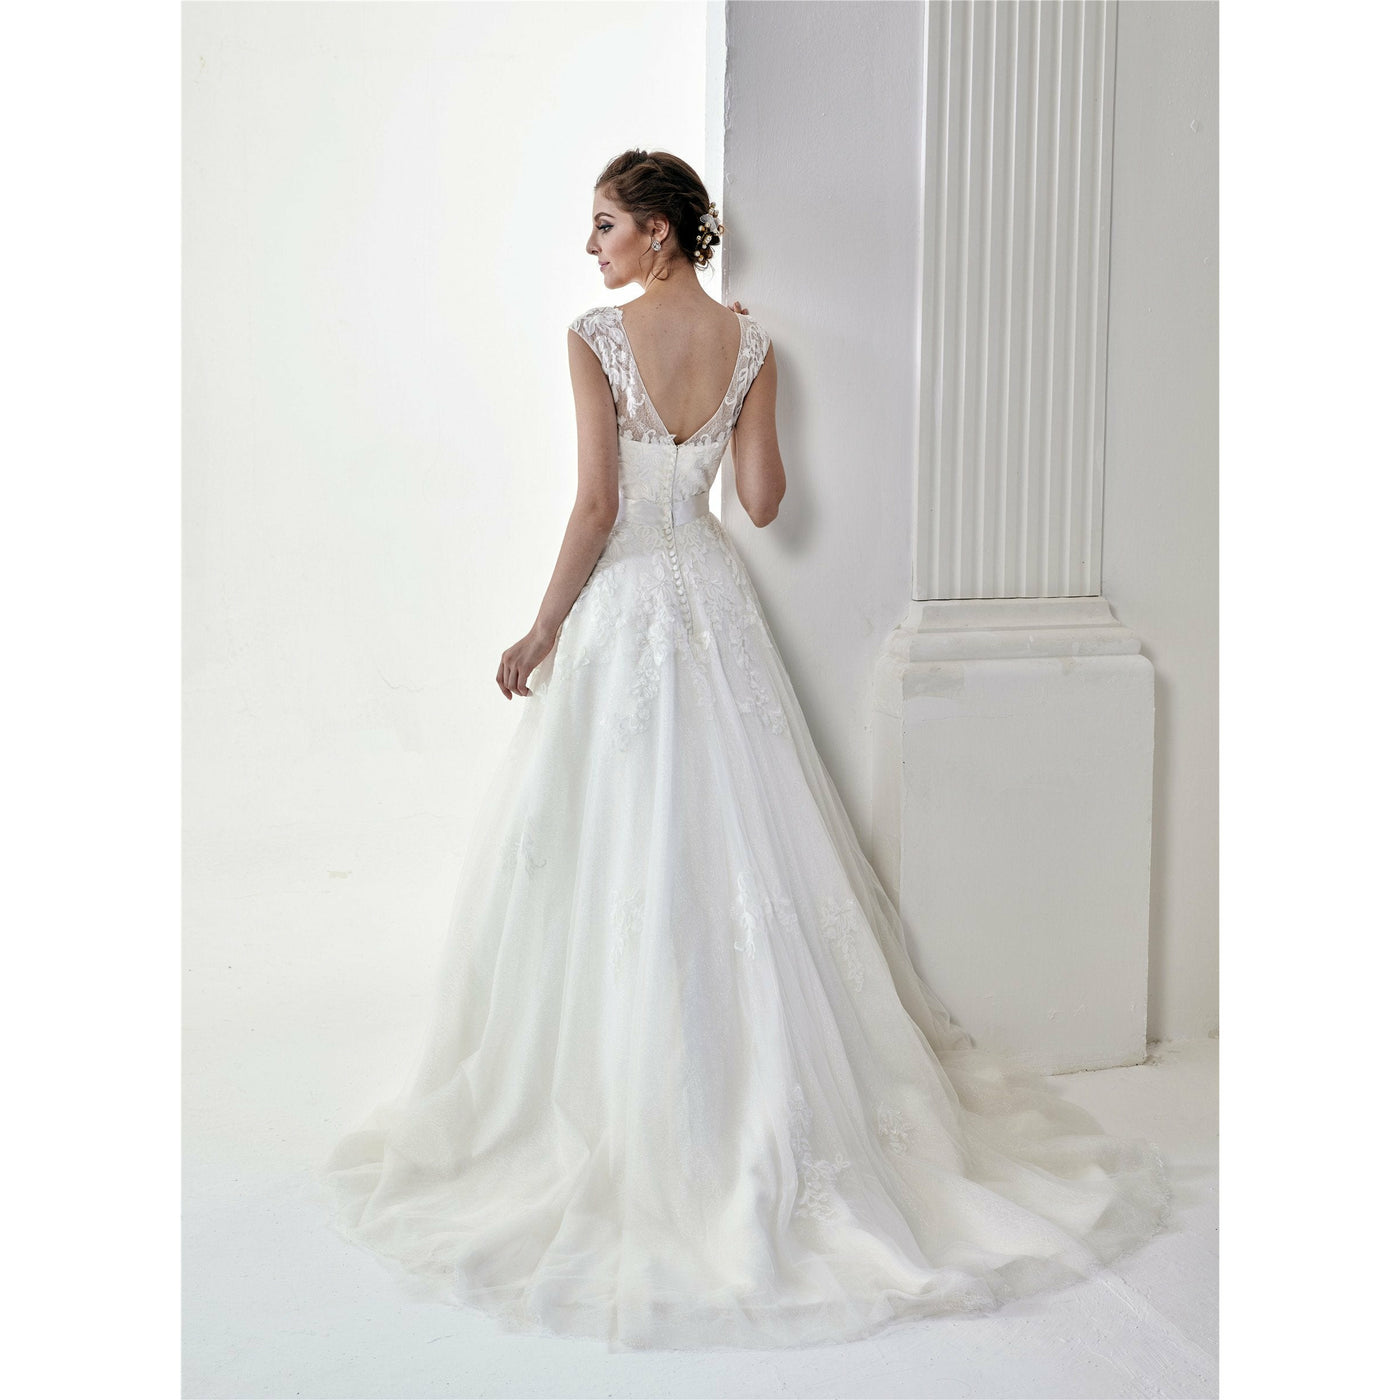 Chicely Illusion neckline Chantilly ly lace A-Line wedding dress2